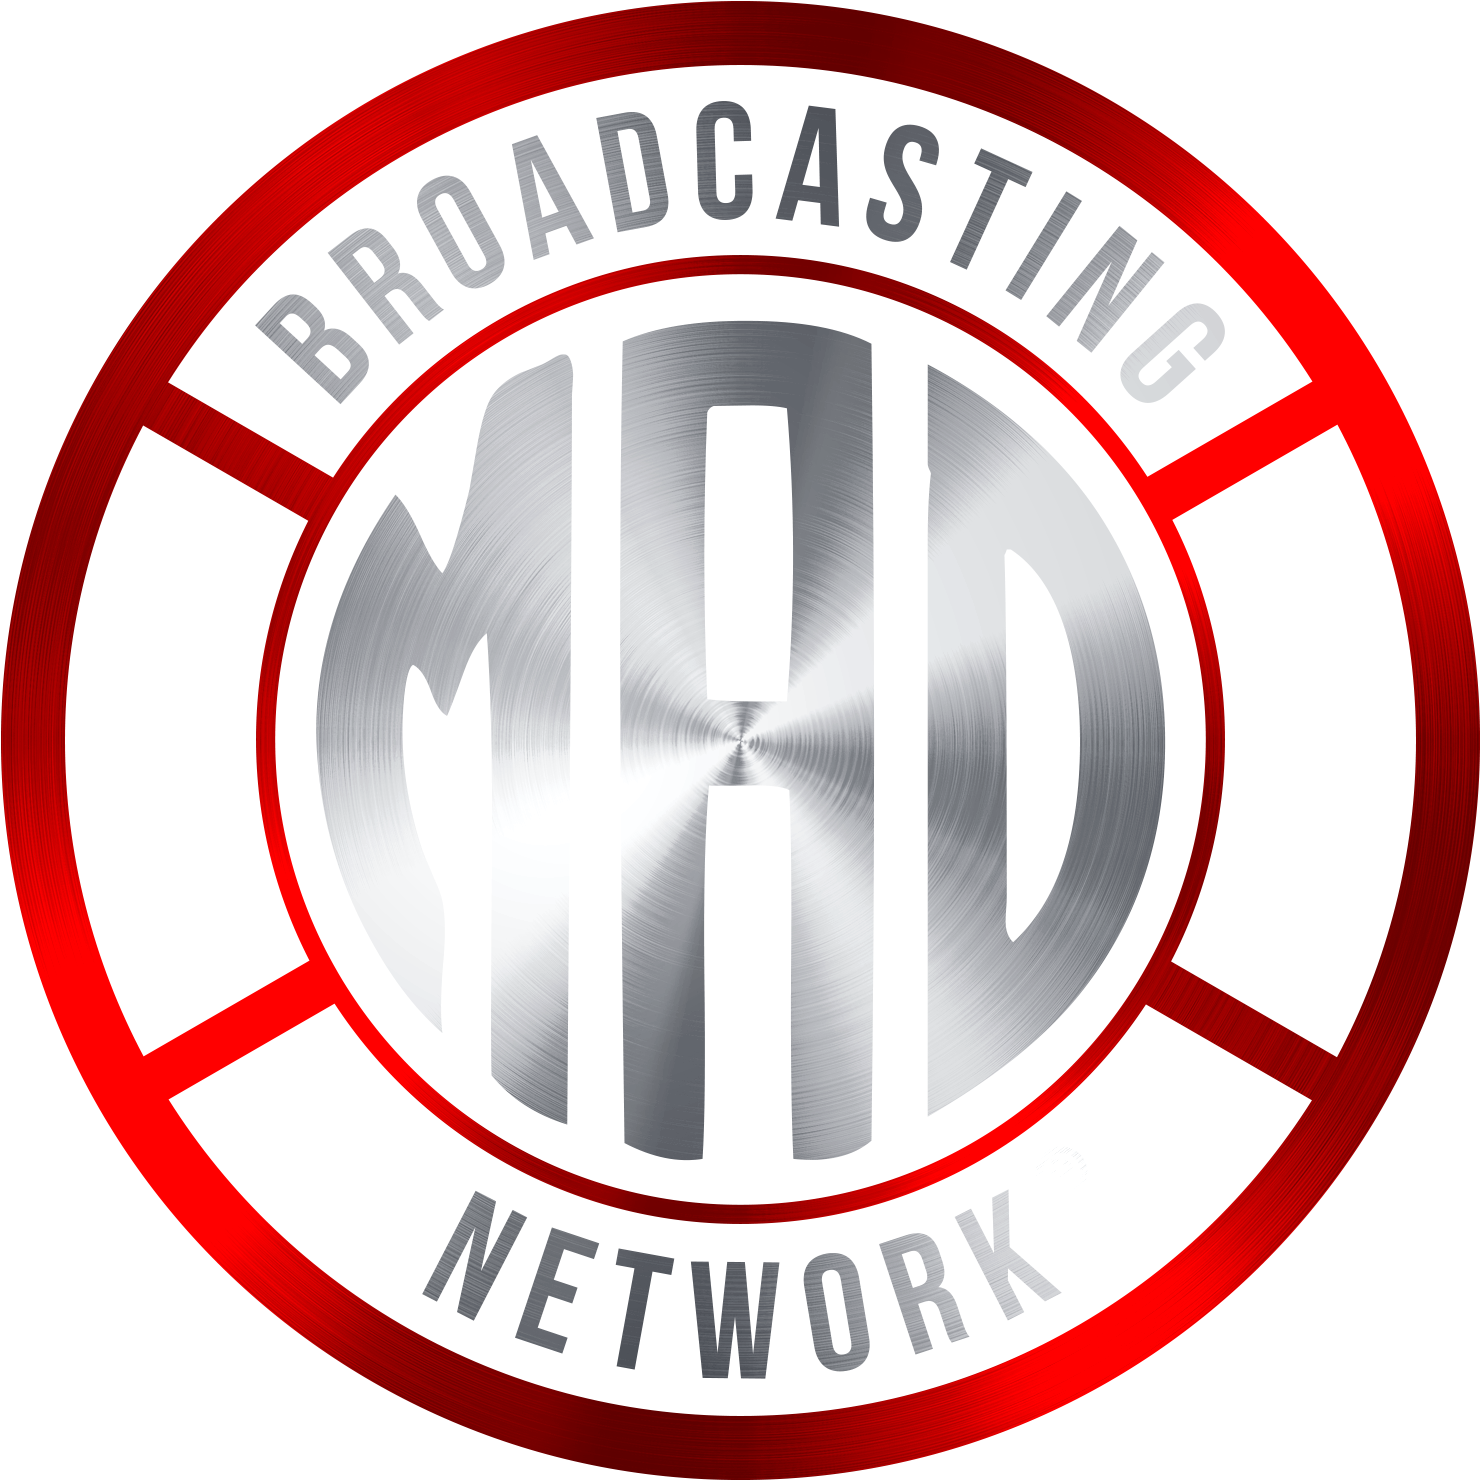 Mad Broadcasting Network - Timeline Icon (2600x1800)